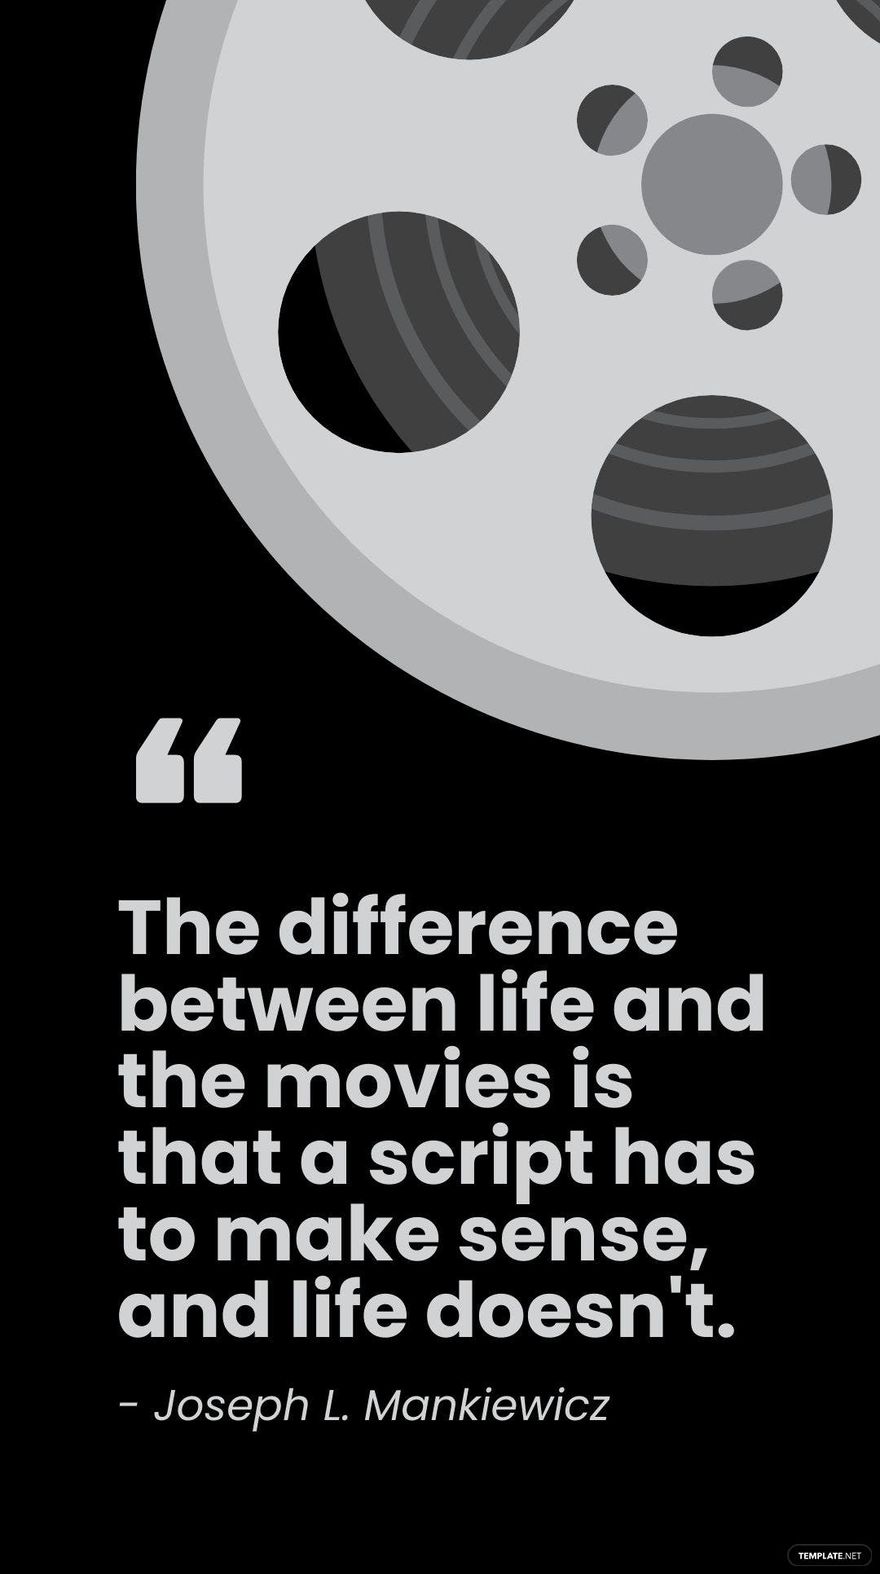 Free Joseph L. Mankiewicz - The difference between life and the movies is that a script has to make sense, and life doesn't. in JPG